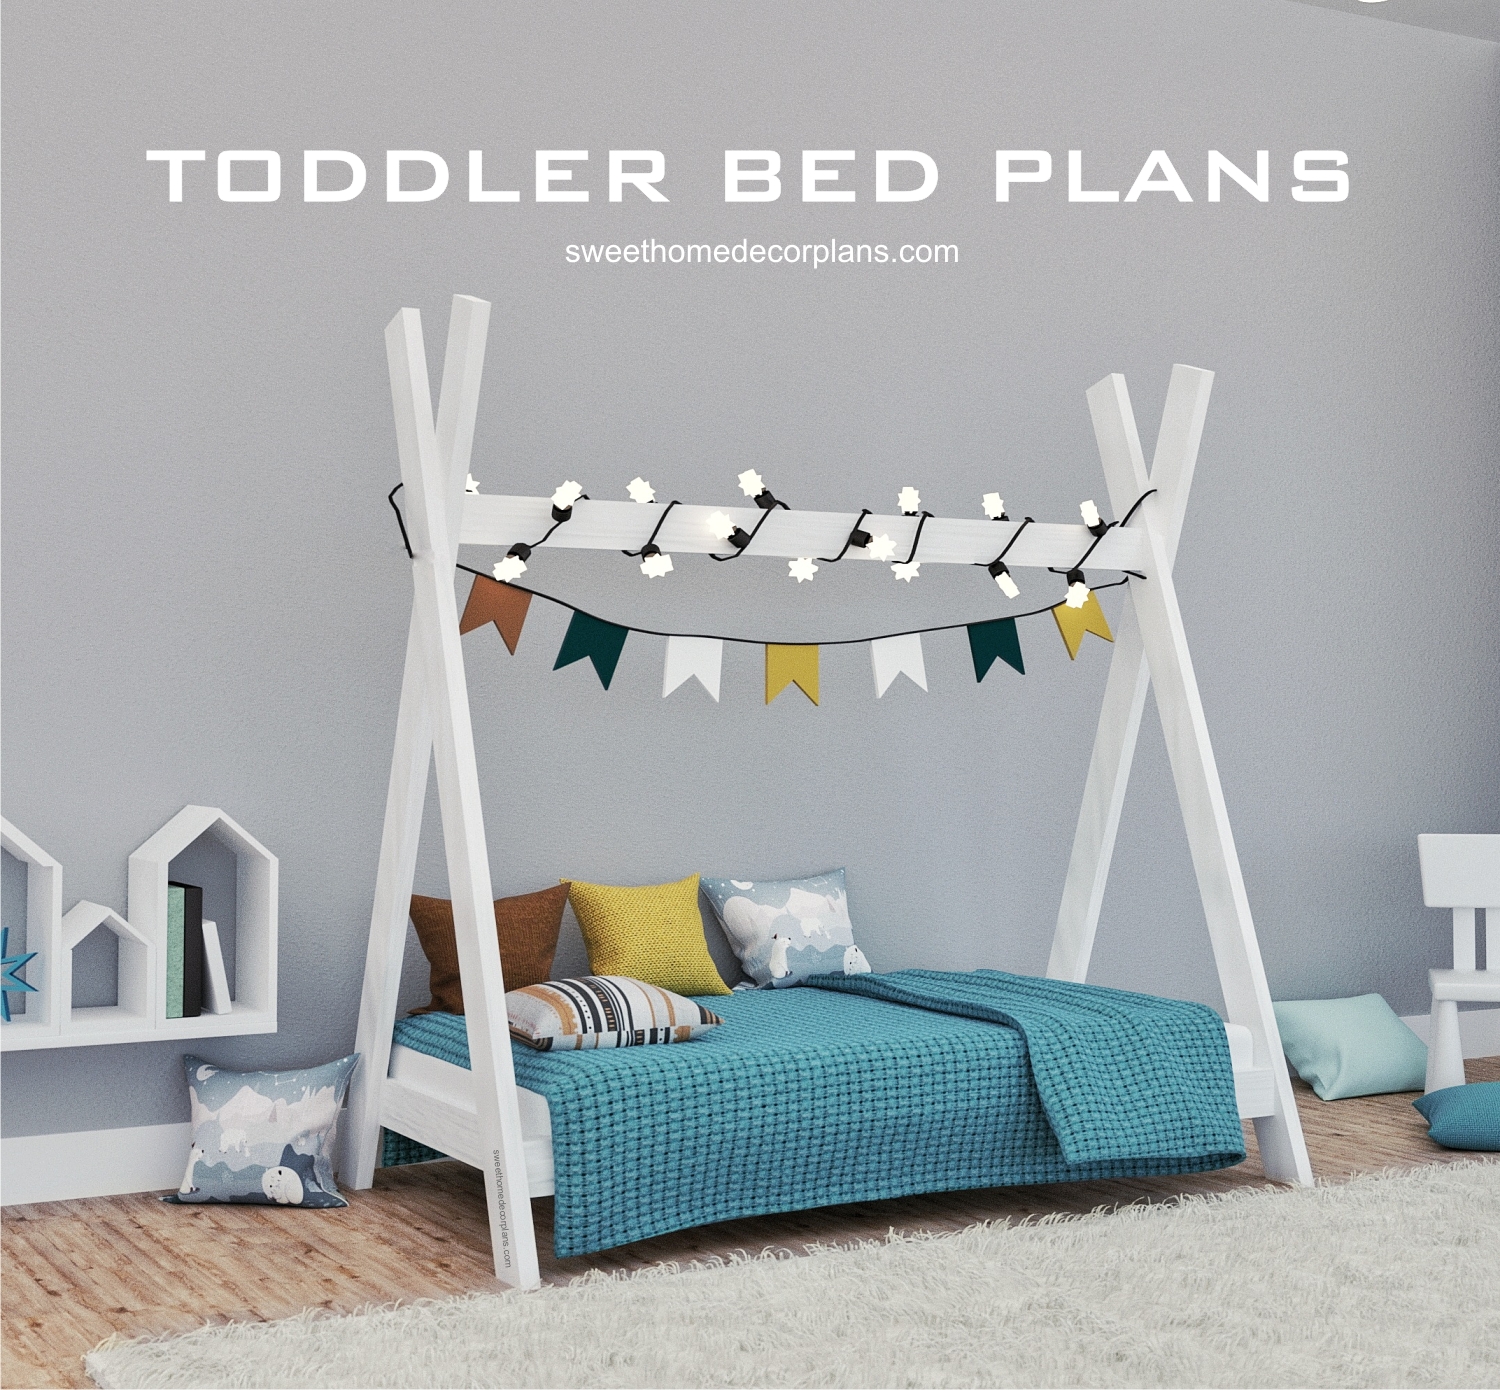 diy-wooden-teepee-toddler-bed-plans-in-pdf-for-kids-room